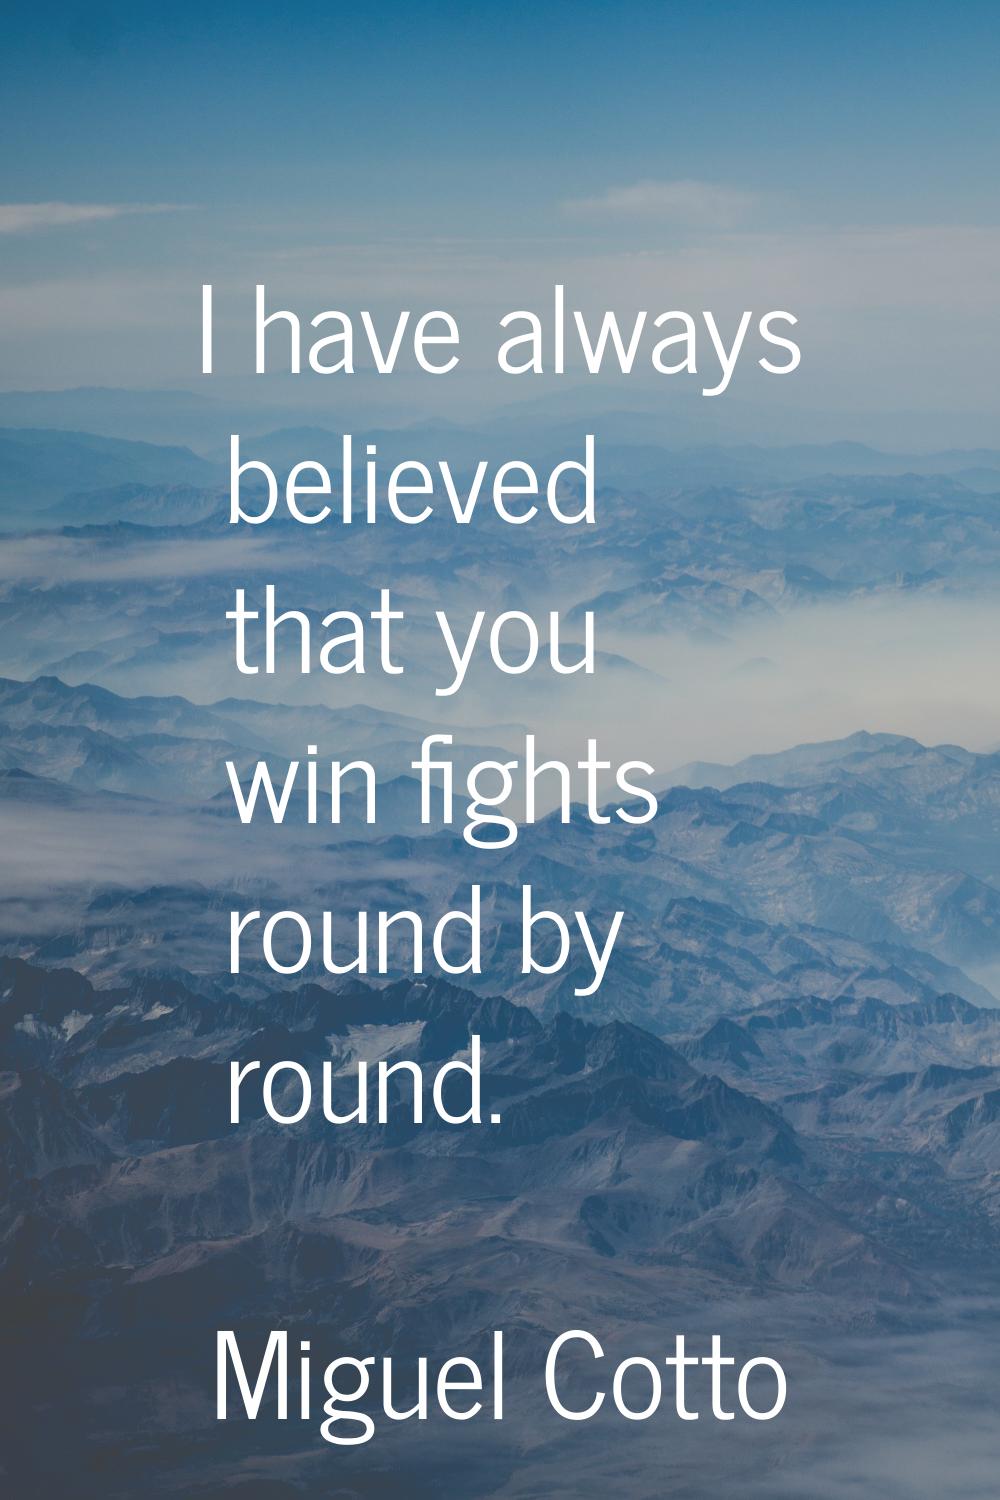 I have always believed that you win fights round by round.